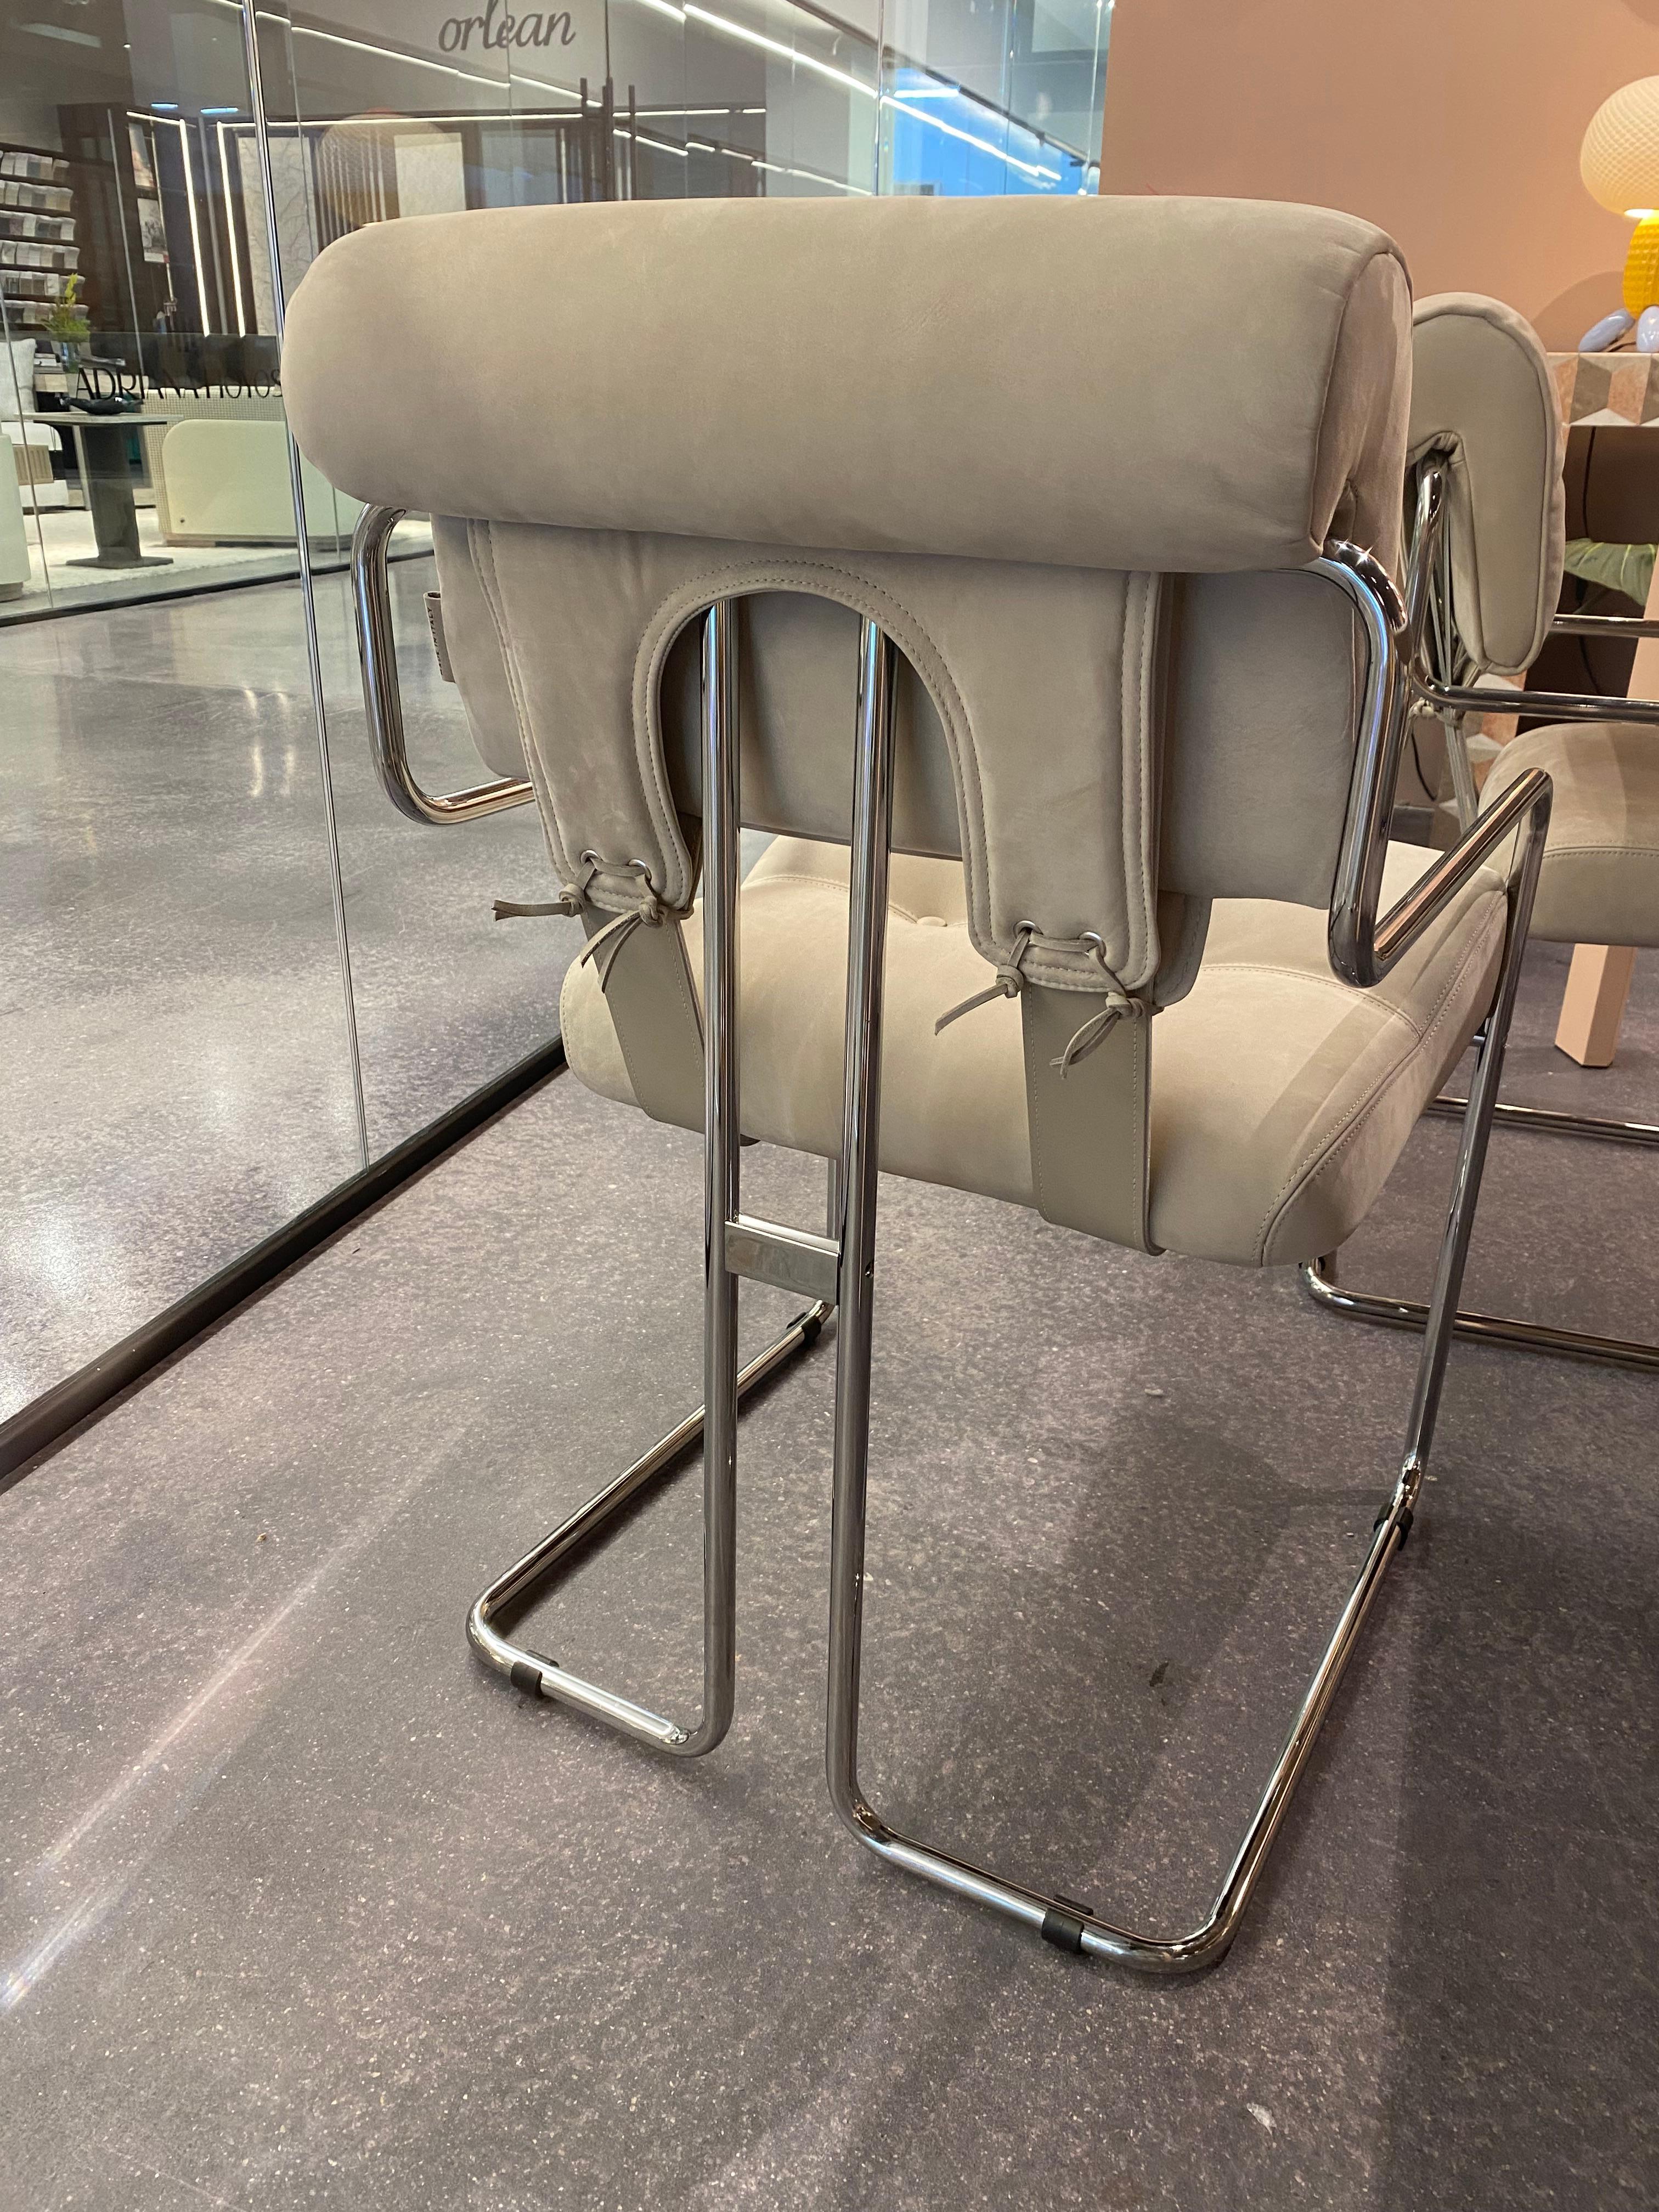 The Tucroma chair, an iconic design by Guido Faleschini from 1971.  These reproductions are upholstered in a light taupe suede with a tubular chrome frame.  Incredibly soft and comfortable..  Gorgeous 1970’s design.  Floor samples in near perfect